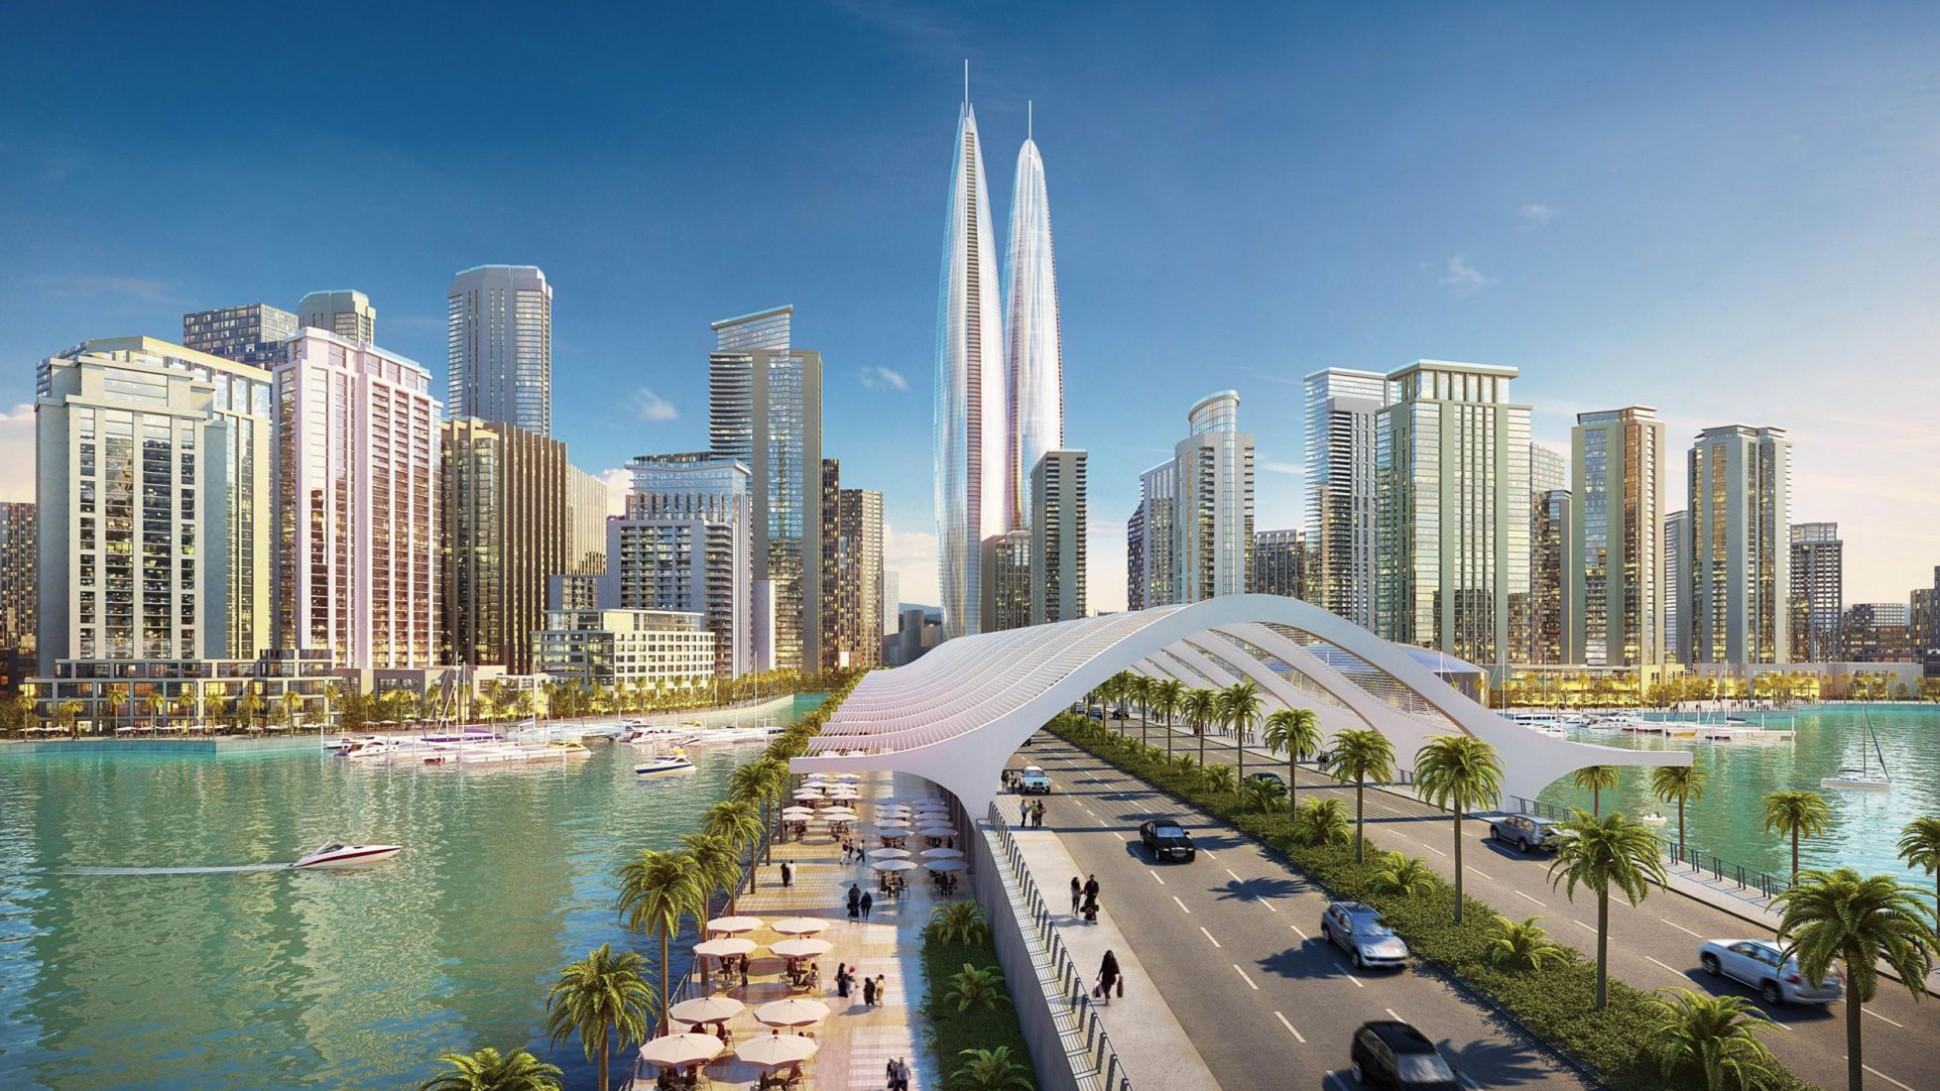 7 Record-Breaking Skyscrapers in the Works Around the World